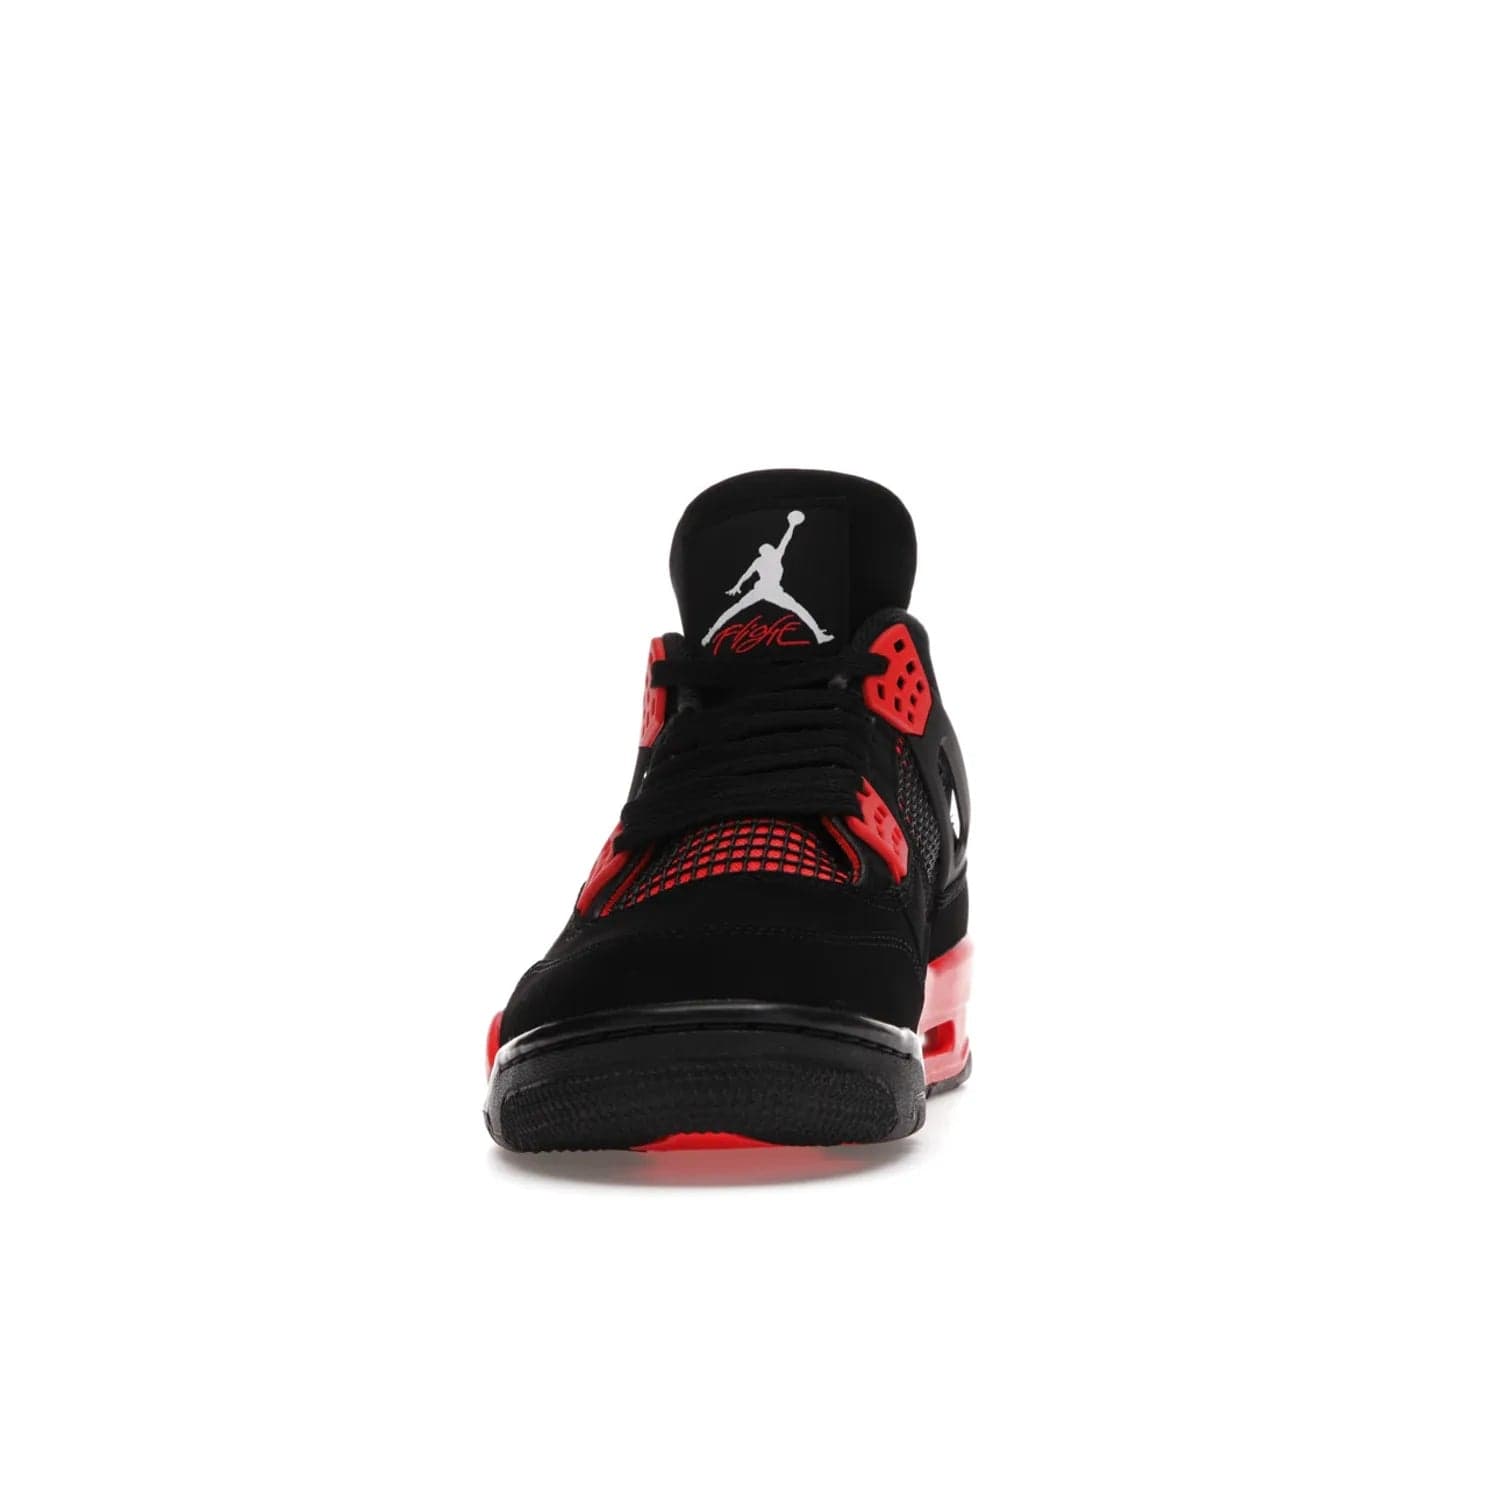 Jordan 4 Retro Red Thunder - Image 11 - Only at www.BallersClubKickz.com - Upscale your footwear with the Air Jordan 4 Retro Red Thunder. Featuring a Durabuck upper, red underlays, signature Flight patch, and vibrant red midsole, this retro sneaker adds style and edge. Releases in January 2022.